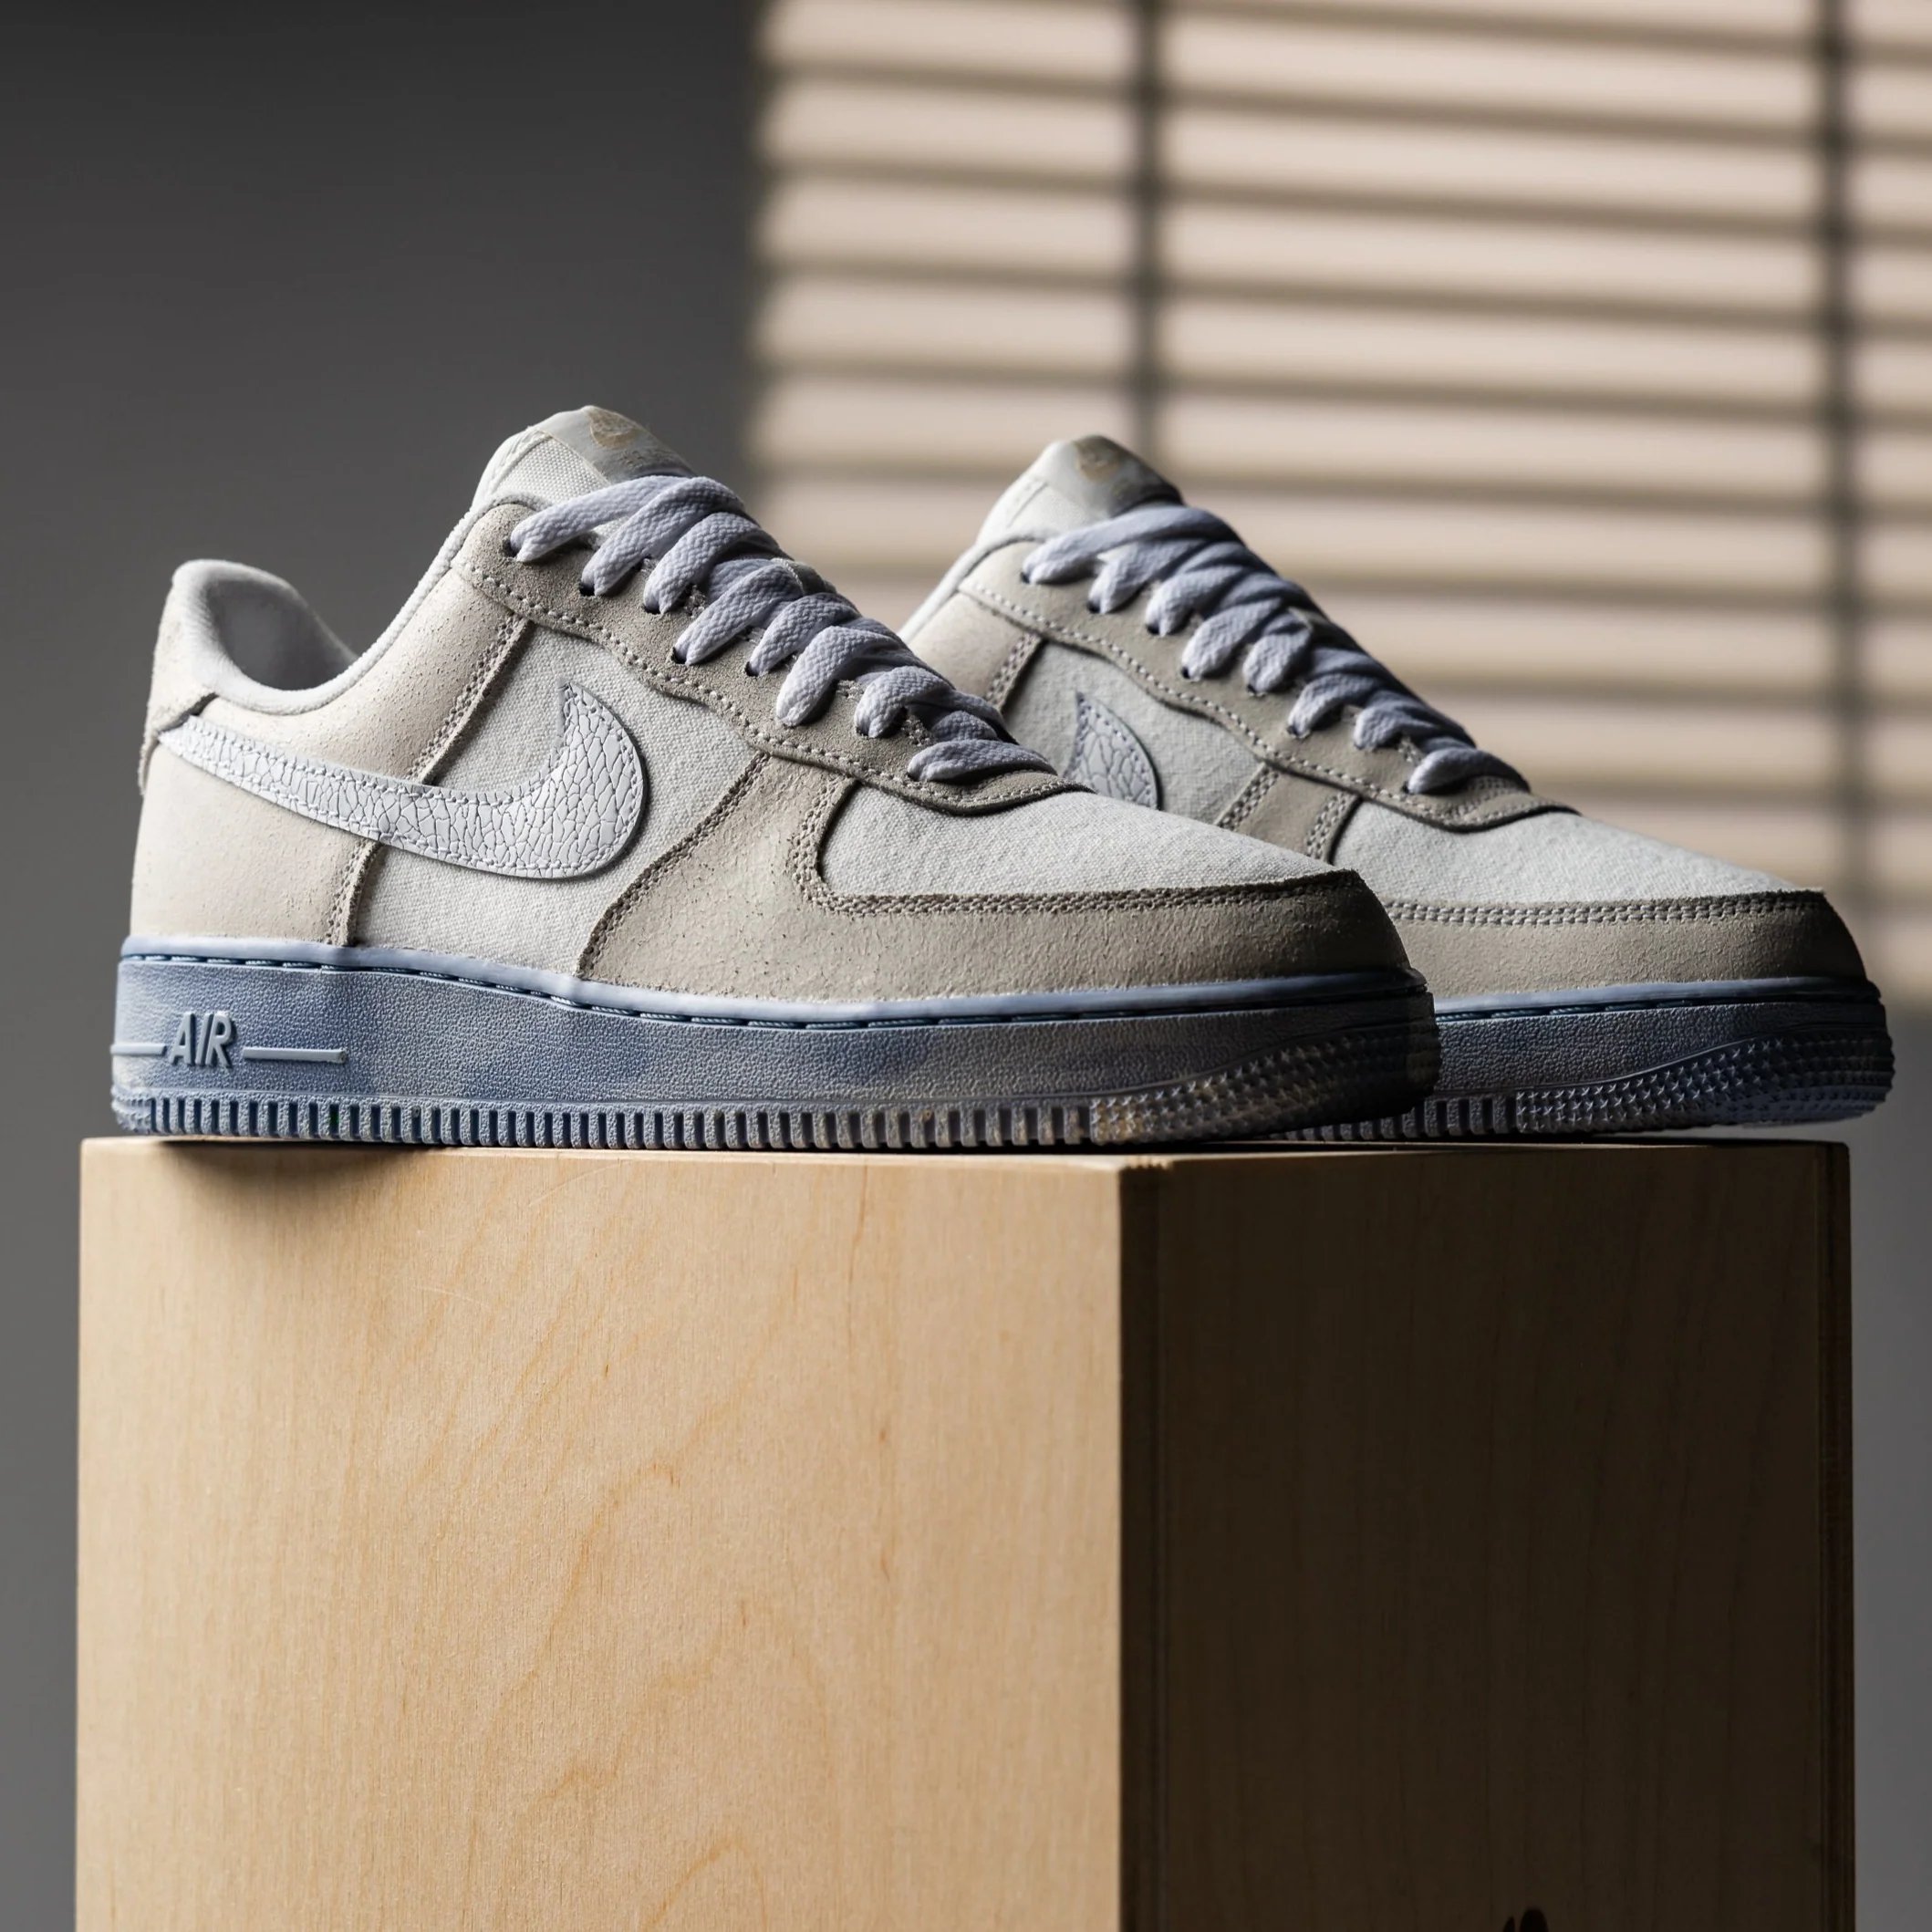 Sneaker Steal on X: STEAL💥 Nike Air Force 1 '07 LV8 EMB 'Summit White / Blue  Whisper' $83.17 + Free Shipping  *use code SPRING at  checkout*  / X